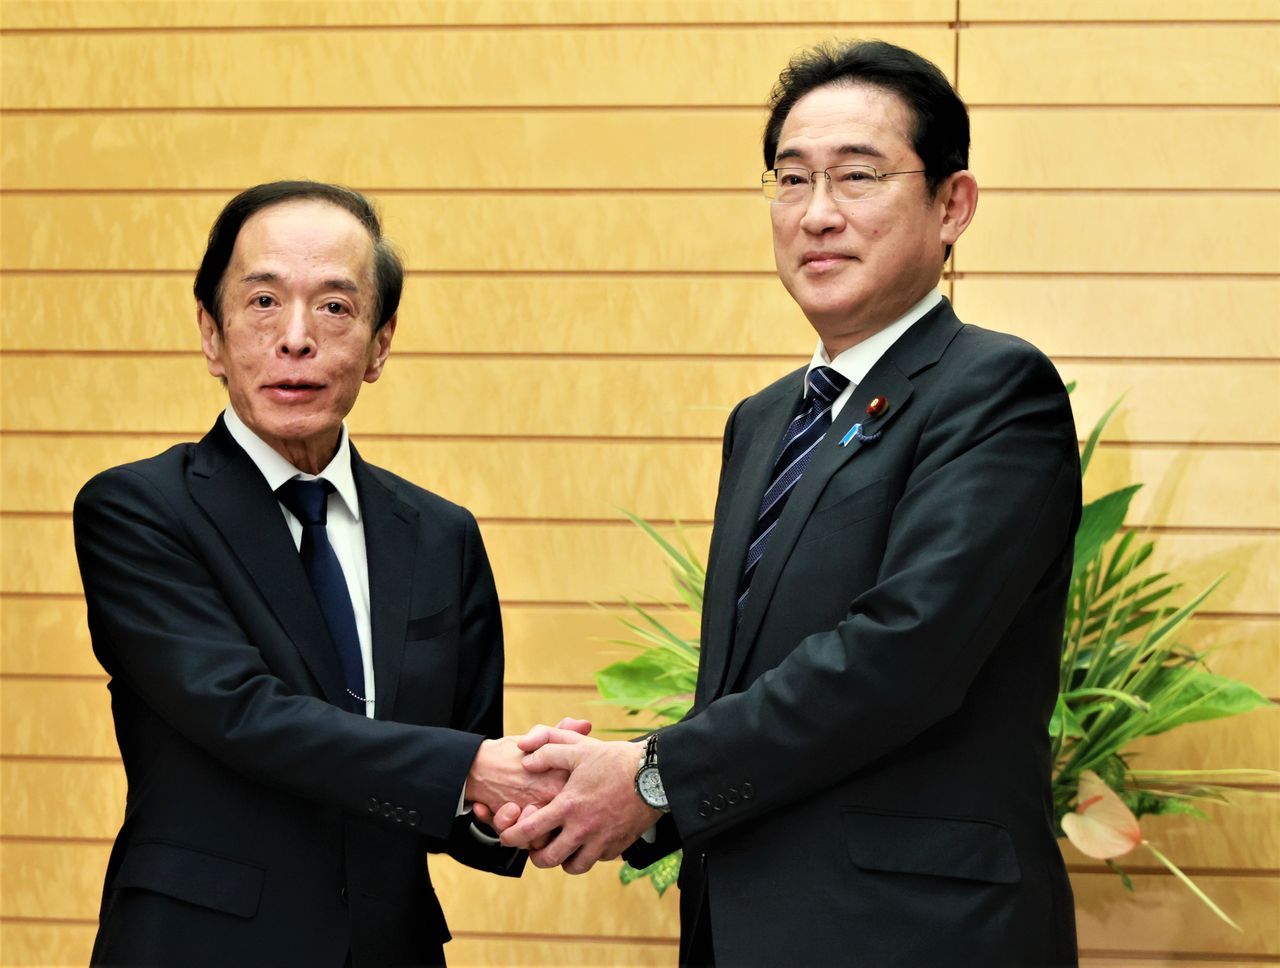 Ueda Kazuo (left) shakes hands with Prime Minister Kishida Fumio after he is appointed as governor of the Bank of Japan. (© Jiji)